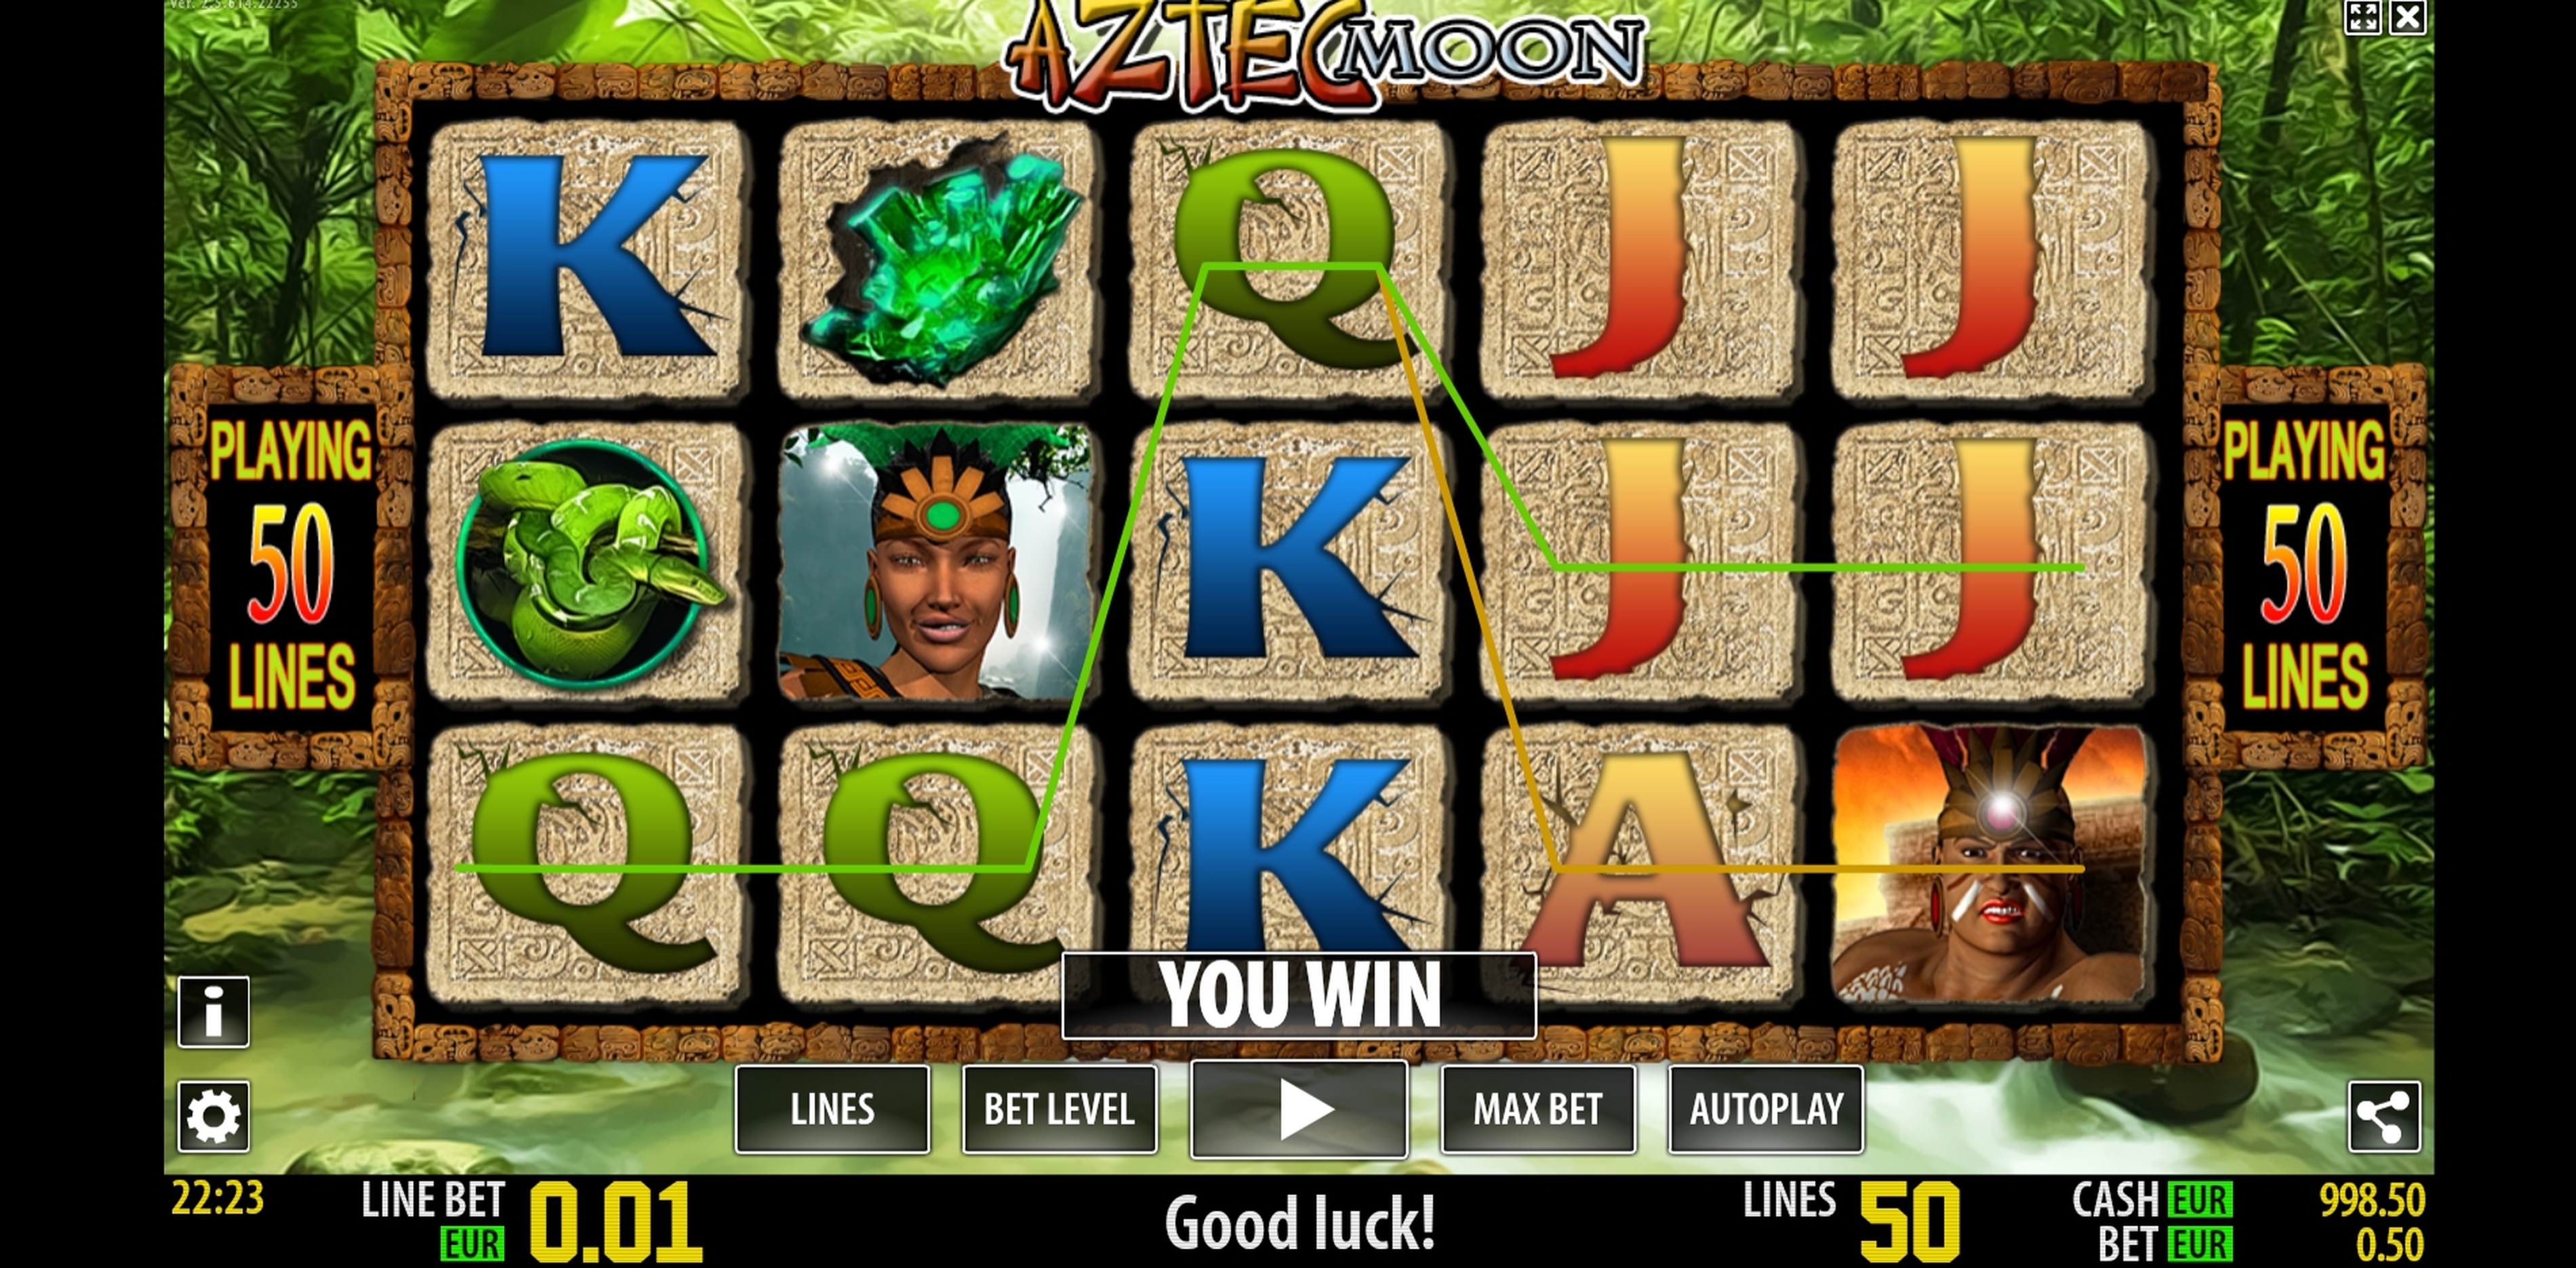 Win Money in Aztec Moon Free Slot Game by Magic Dreams